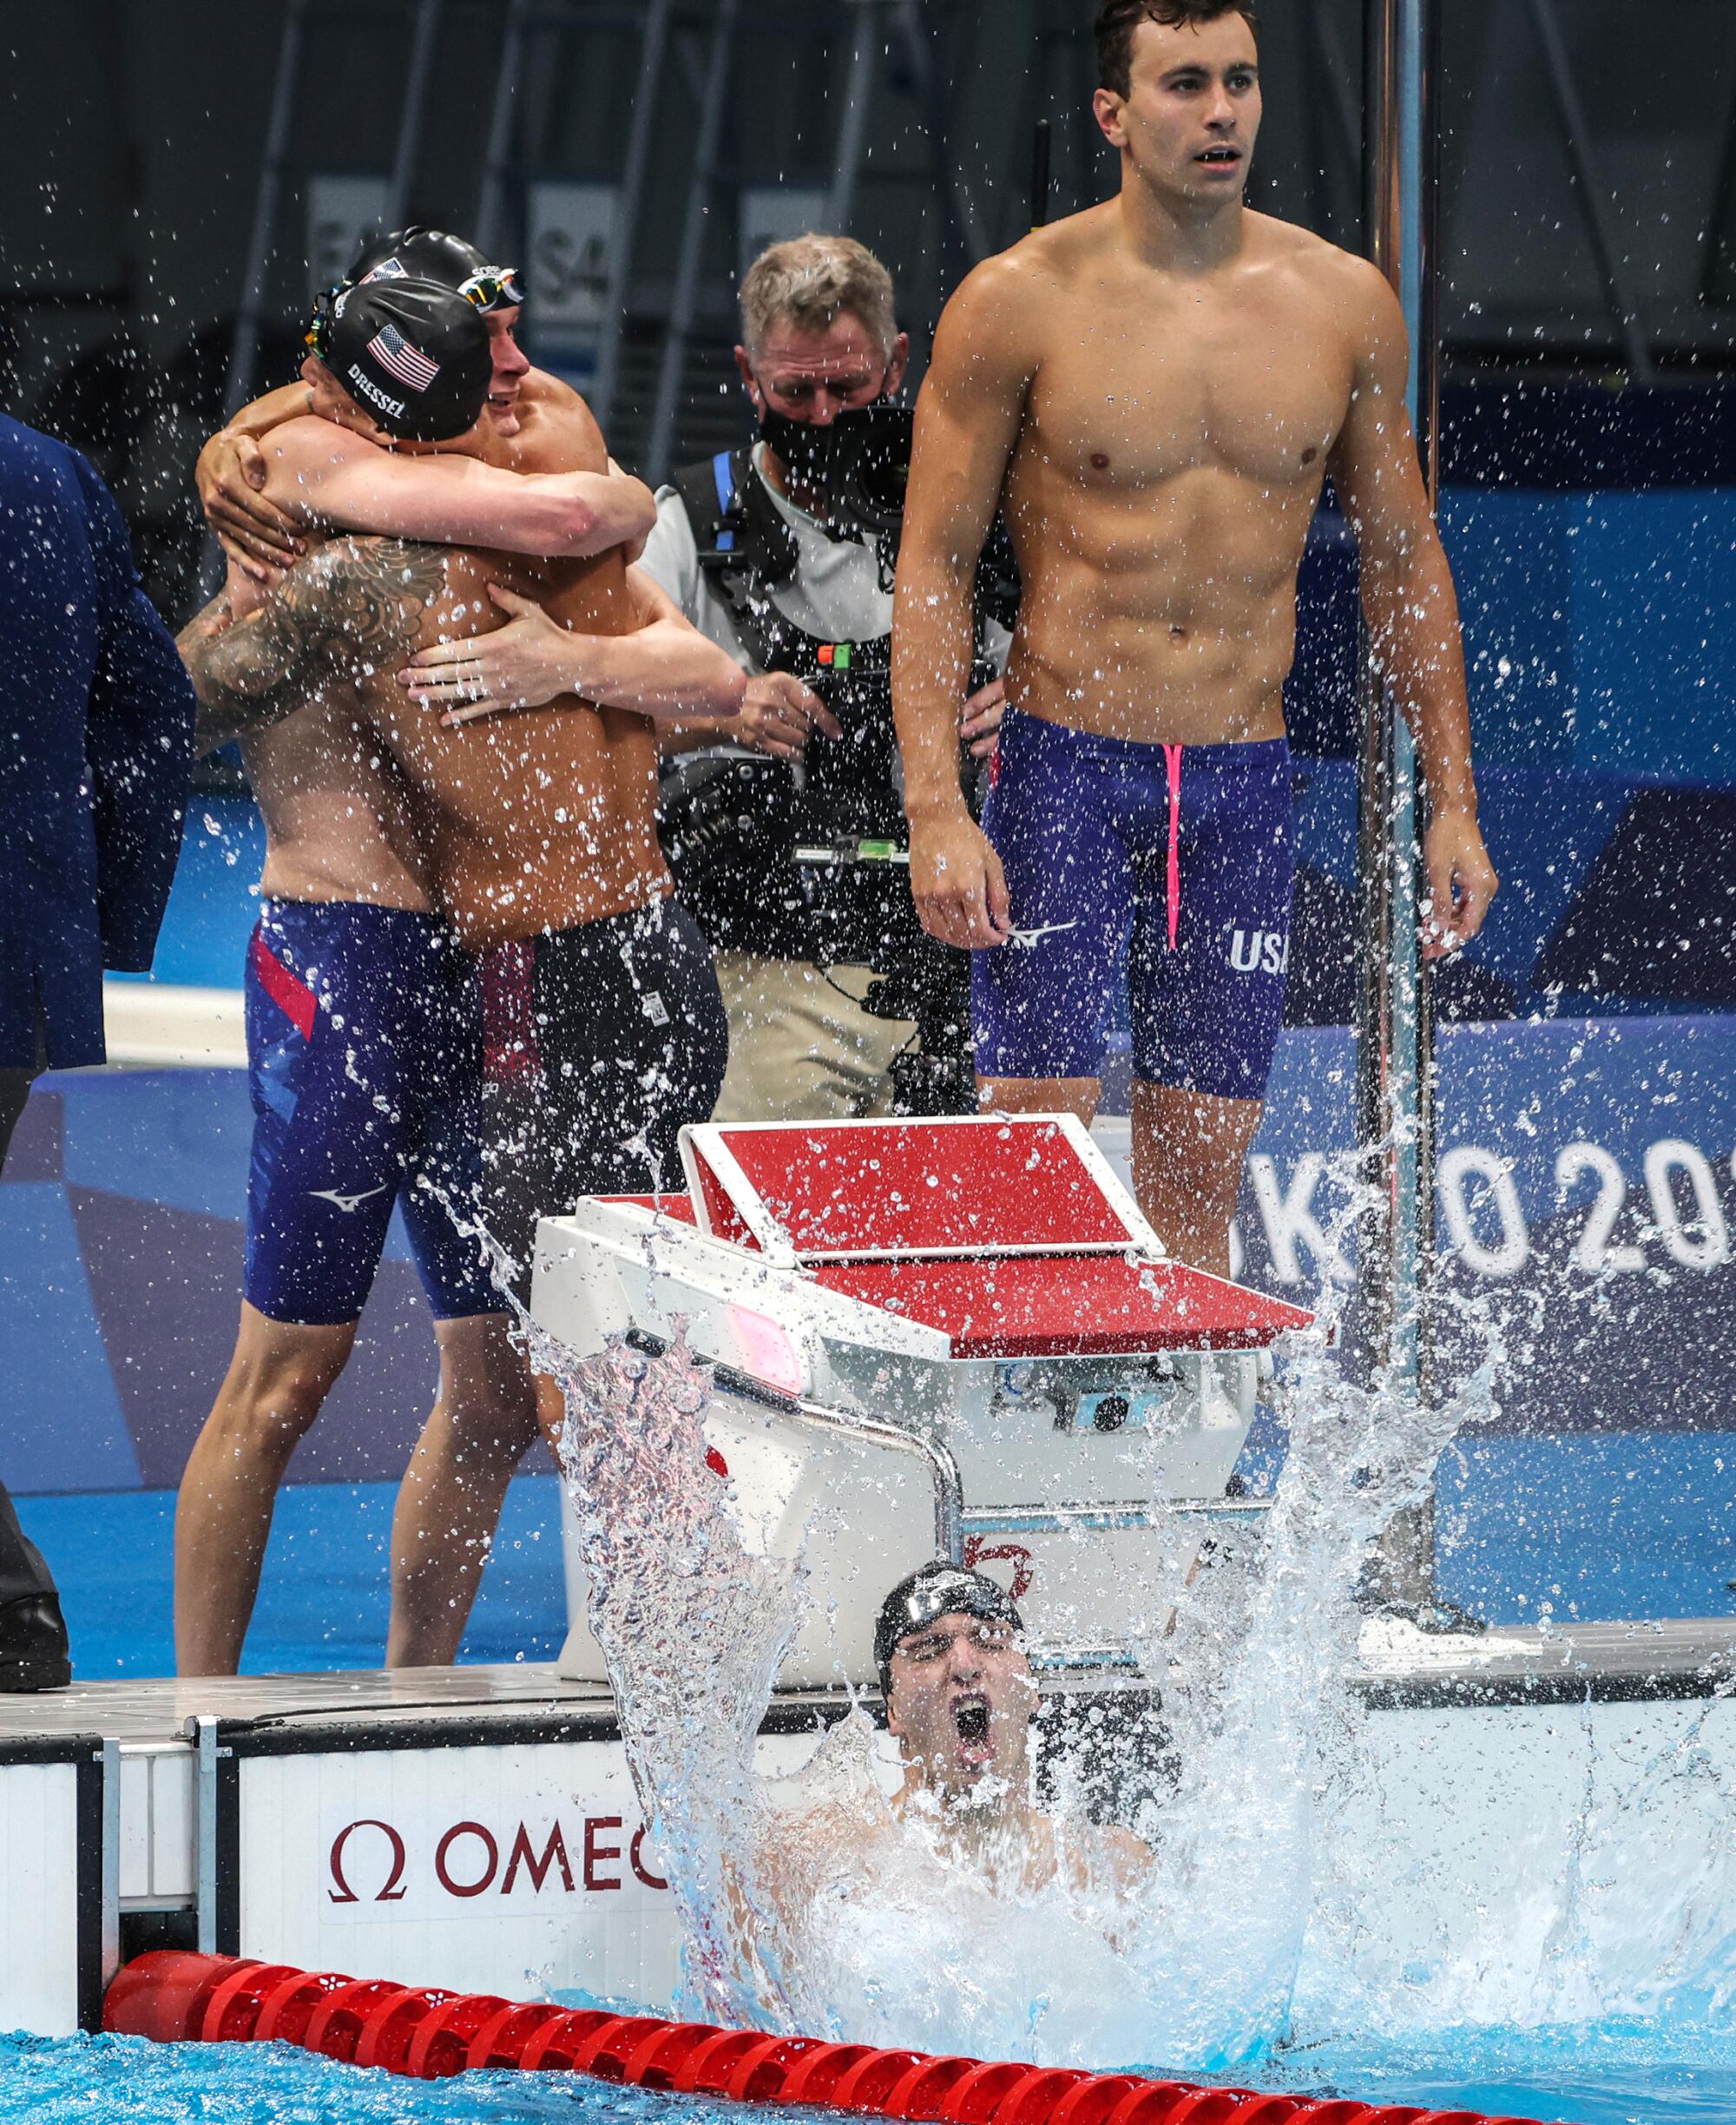 Zach Apple splashes the water in jubilation after winning the men's 4x100 freestyle relay.